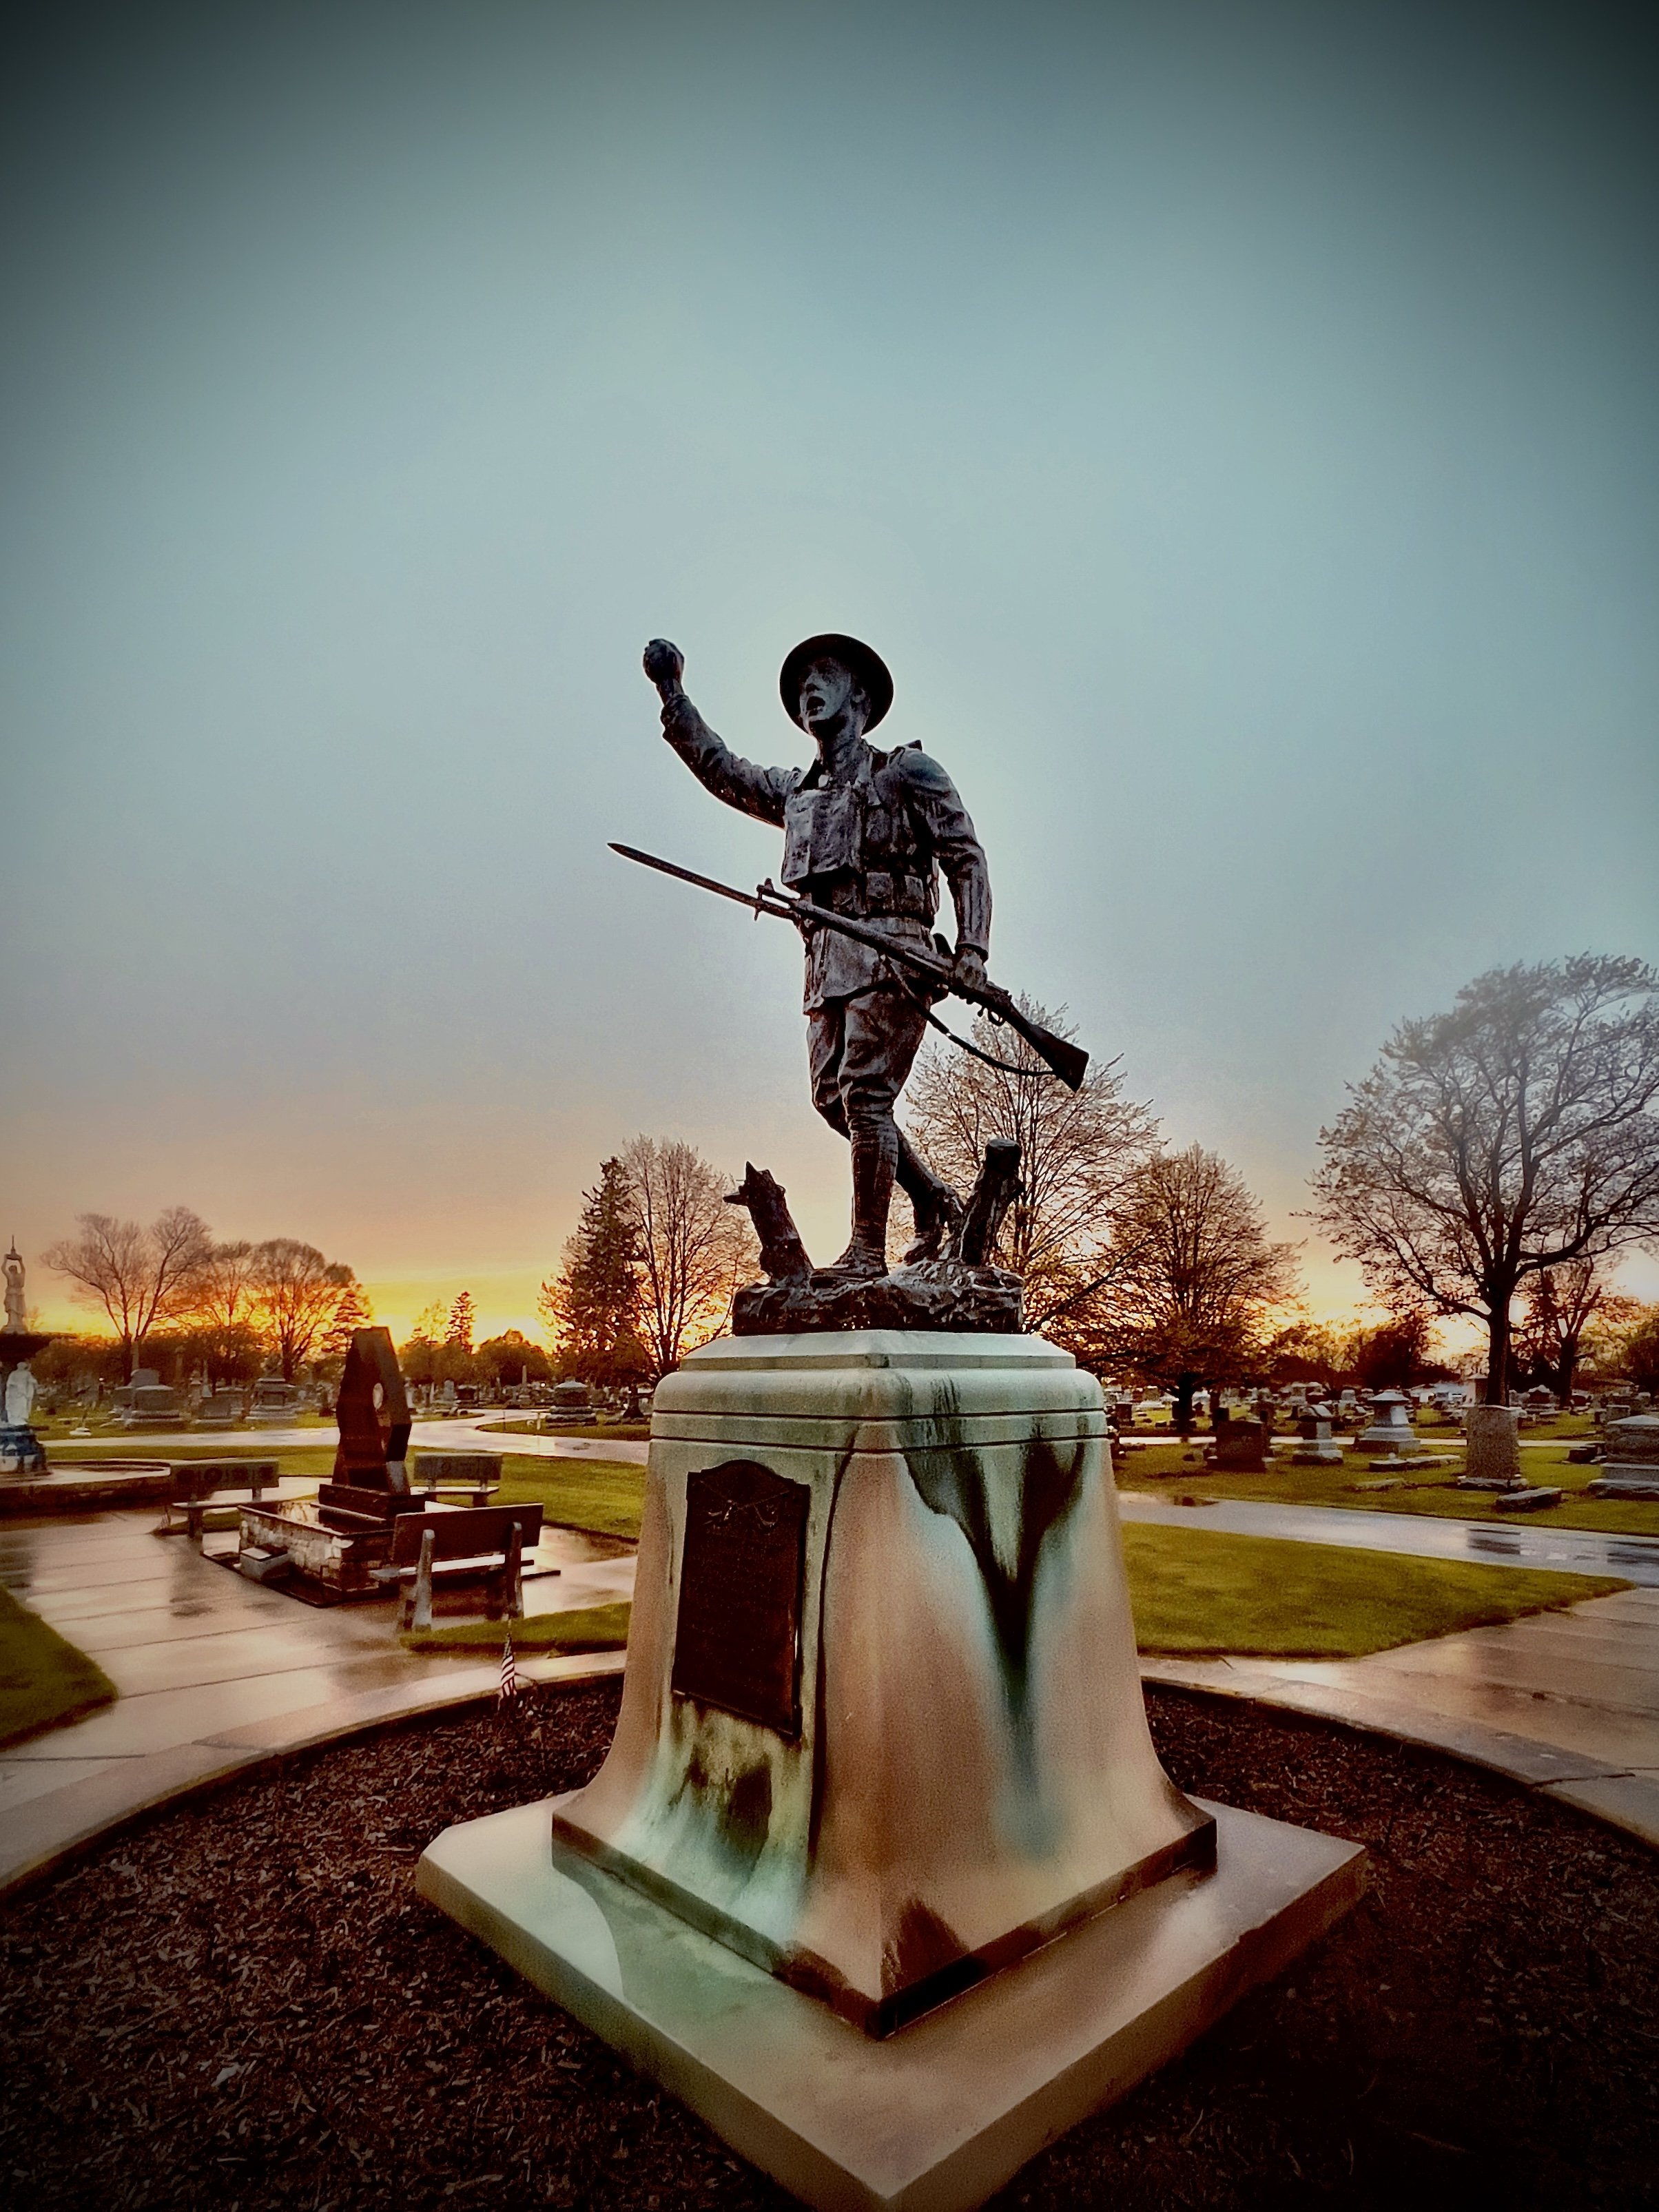 A Fostoria photographer captures the essence of American Doughboy statues, including those at Fountain Cemetery, against a backdrop of natural beauty.